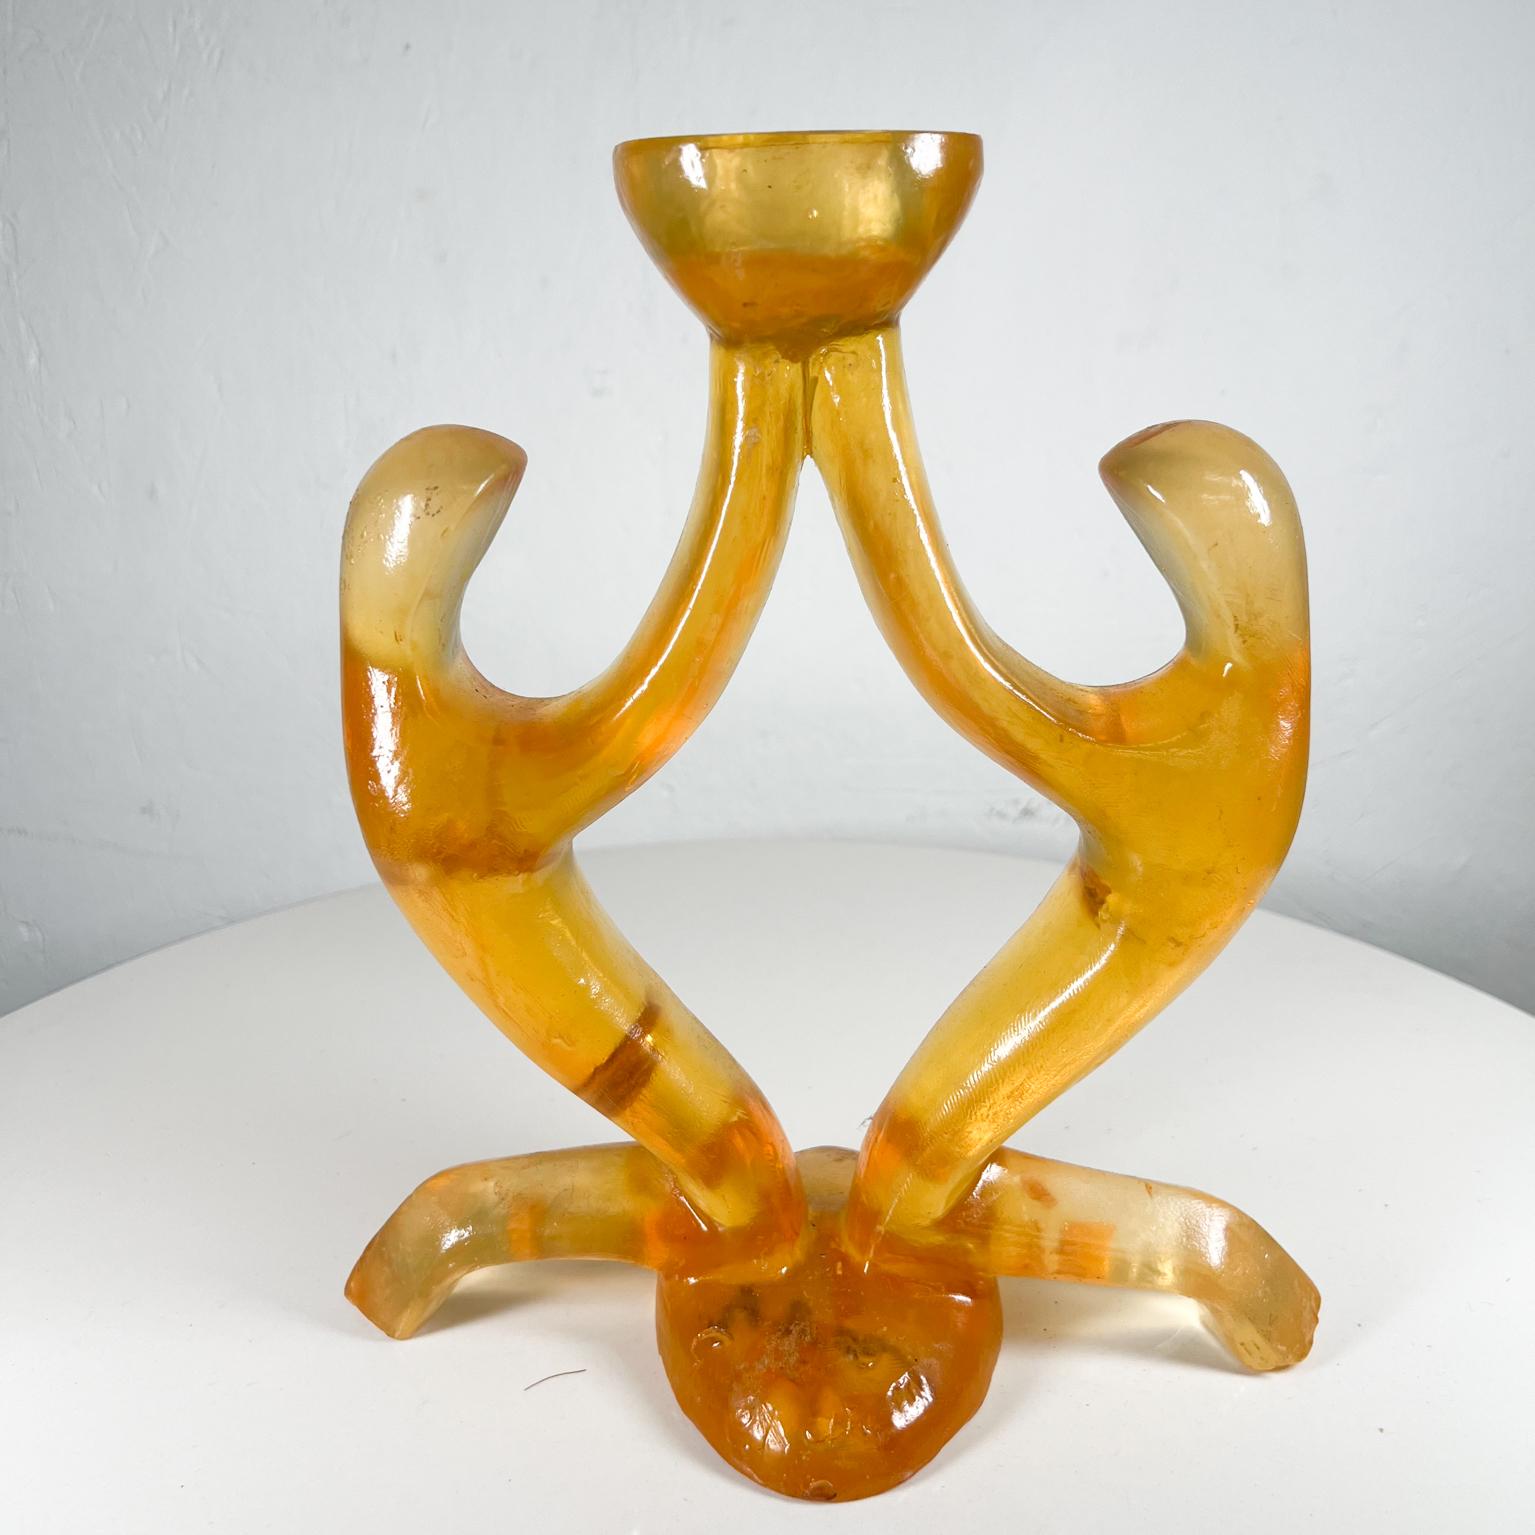 Vintage amber candle holder with sculptural shape.
Will hold one candle.
9.25 x 4.88 d x 10.63 tall
Signed at base. Unable read signature.
Original vintage preowned condition.
Refer to images.